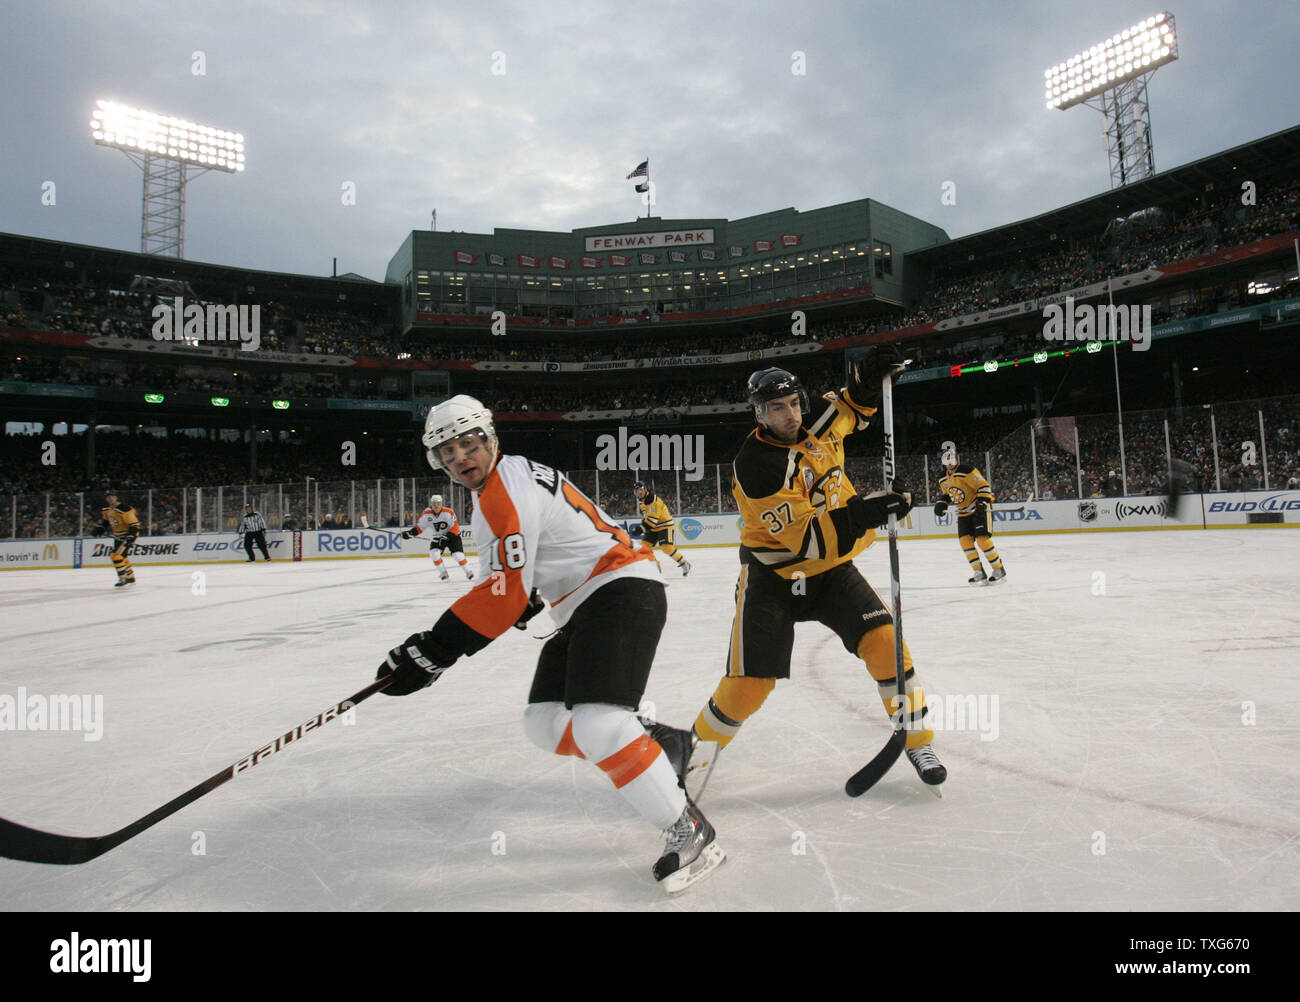 Nhl winter classic hi-res stock photography and images - Alamy